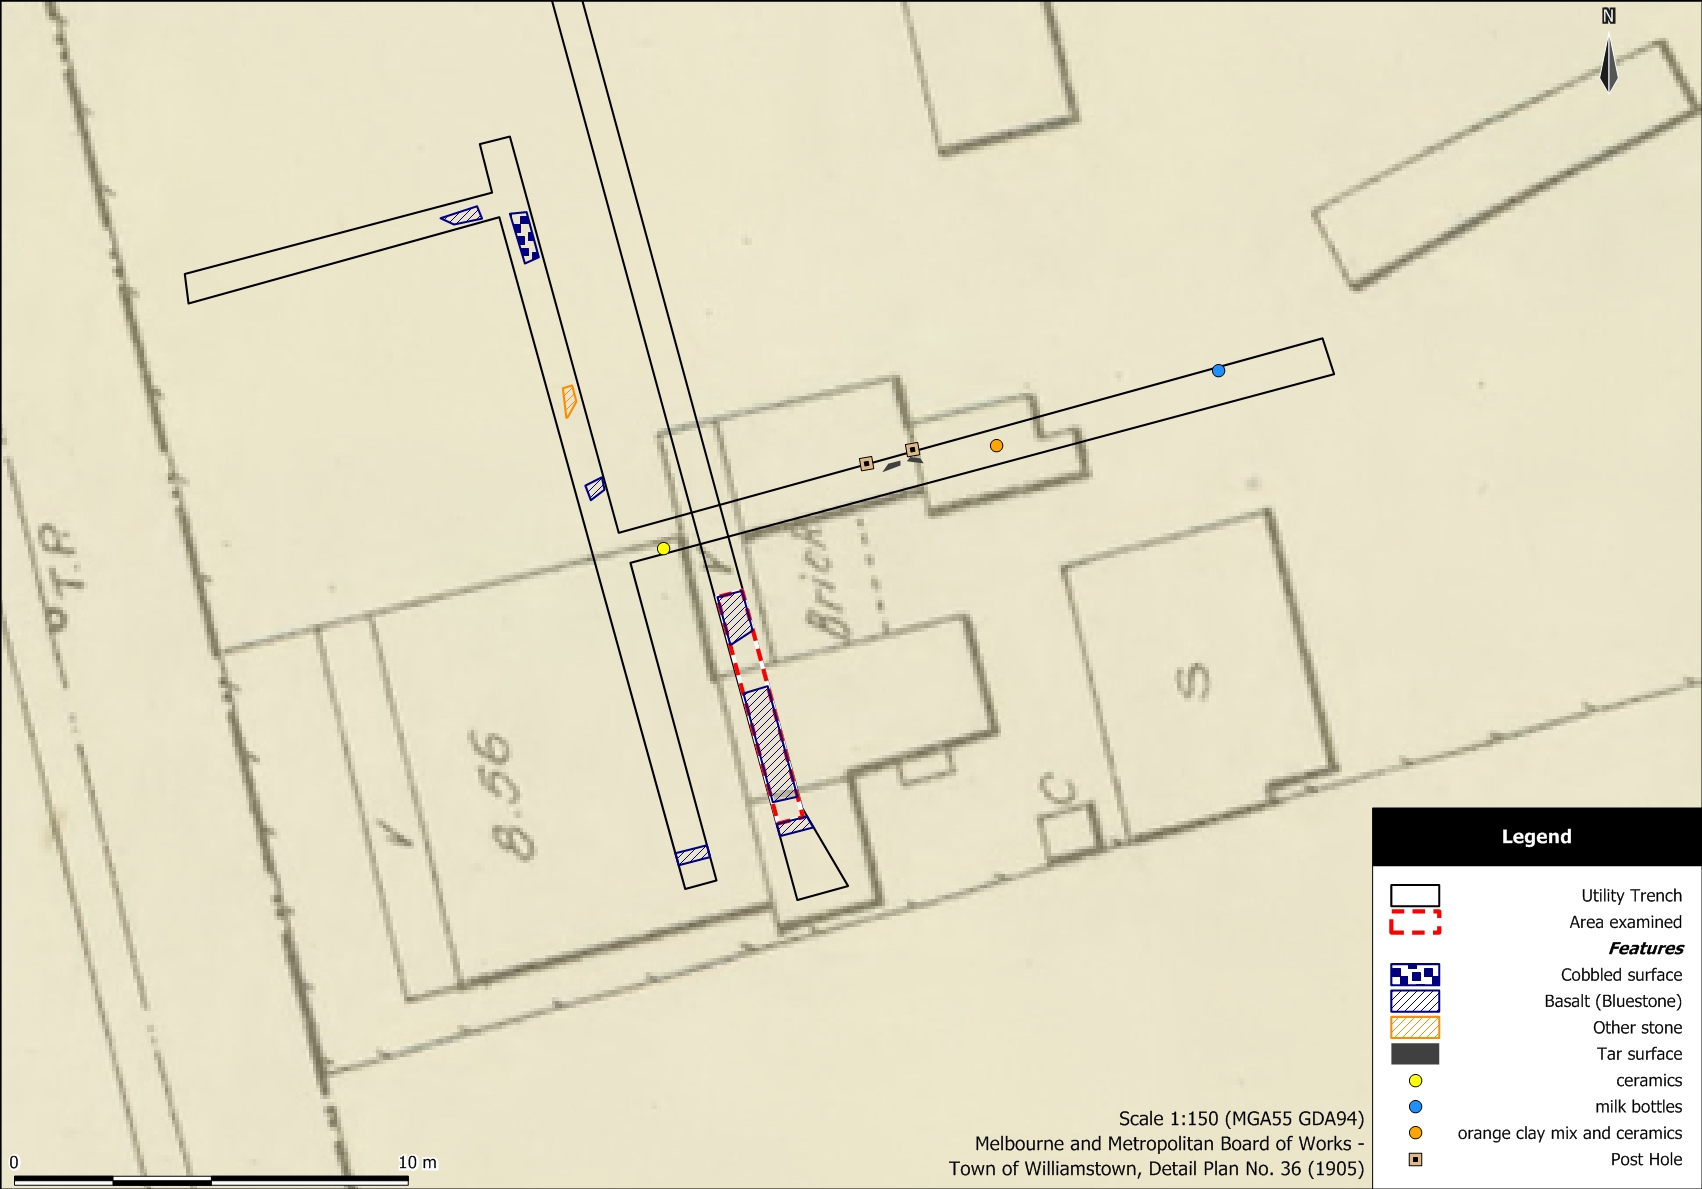 Excavated trenches and features identified overlaid on MMBW 1905 Map